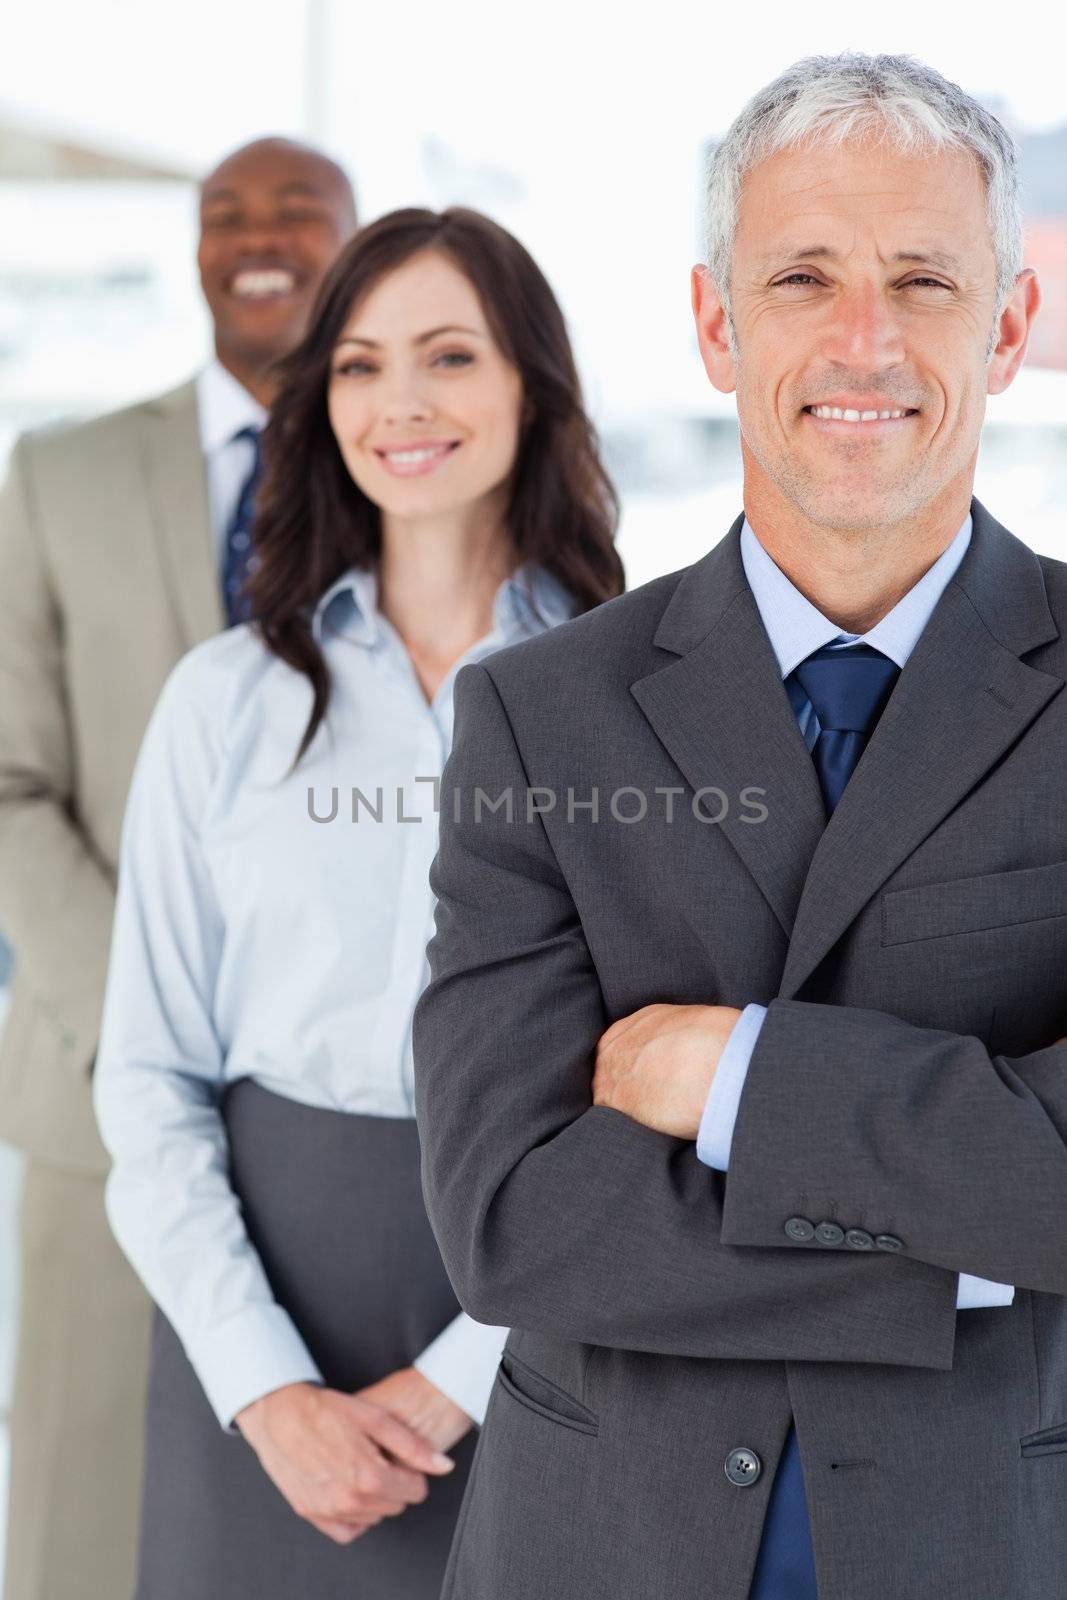 Mature manager in a suit followed by two young business people by Wavebreakmedia